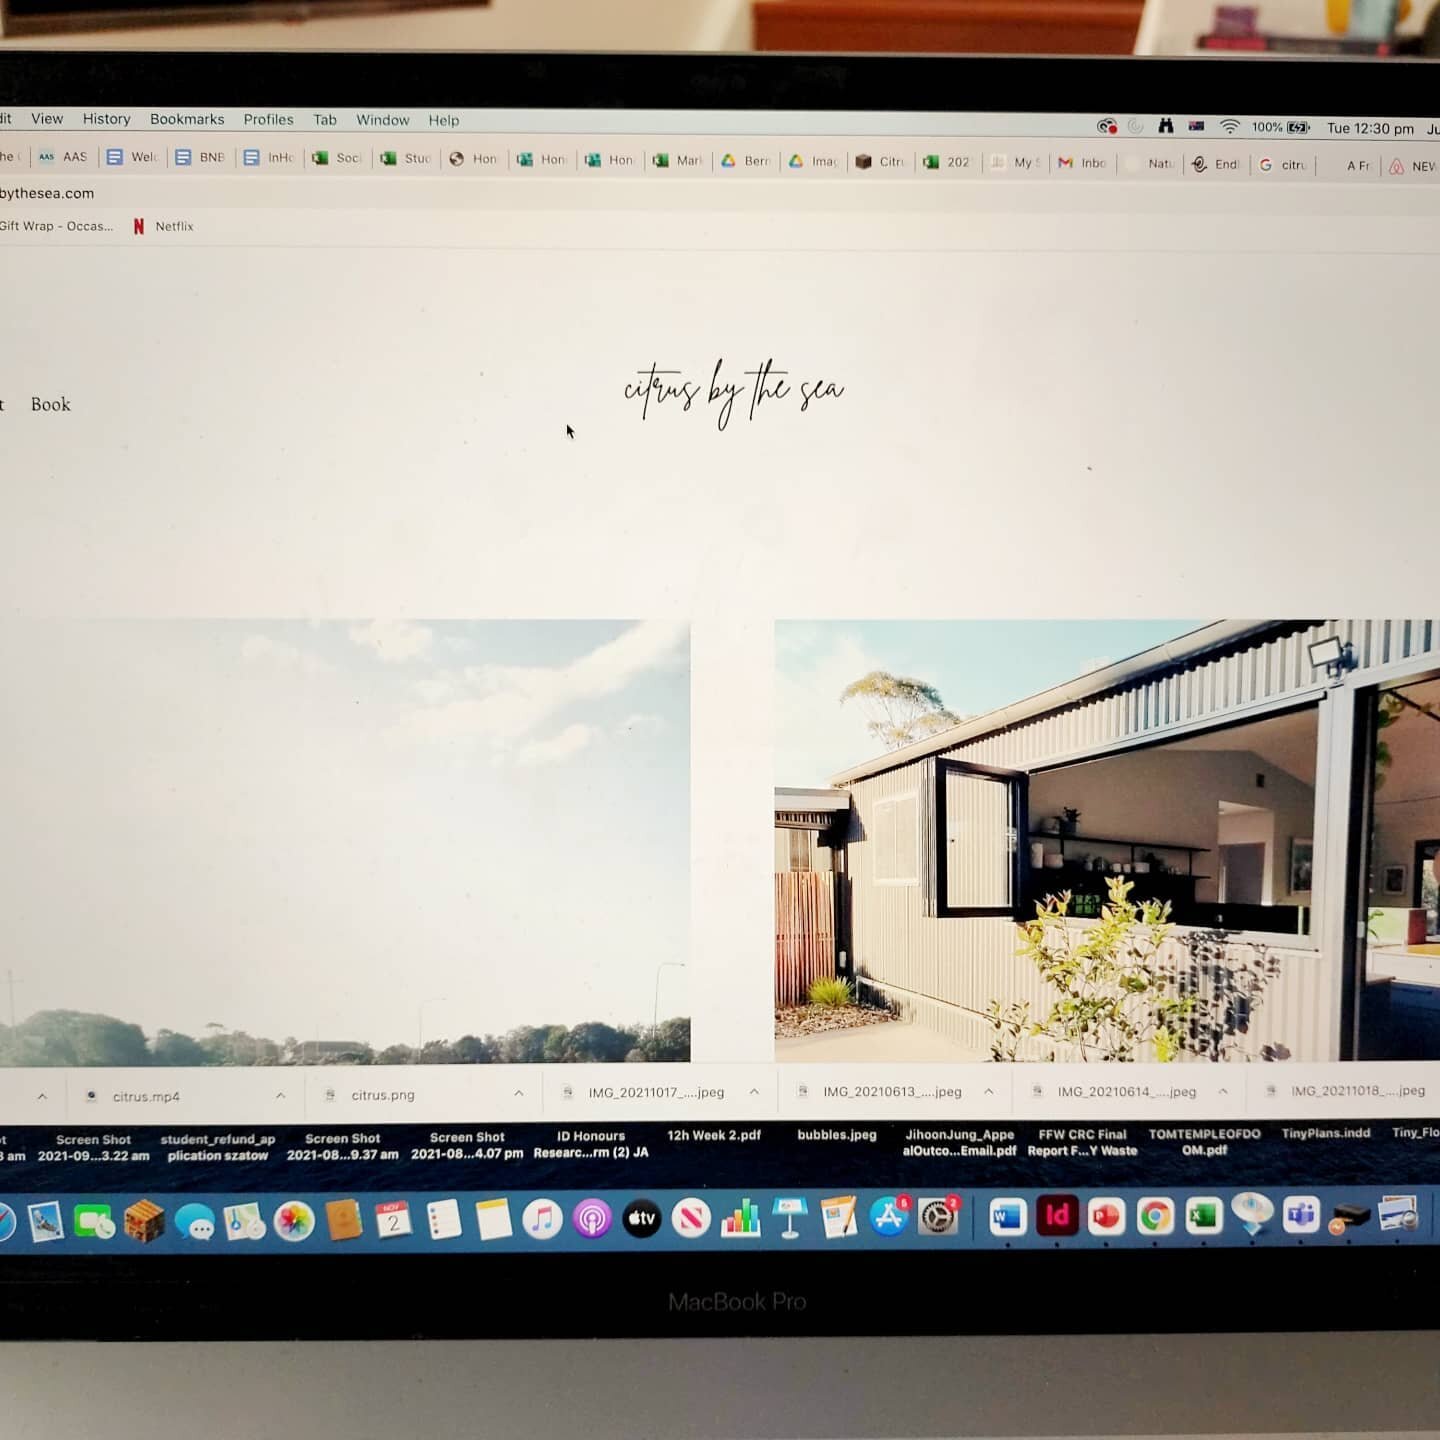 Being super productive on this Victorian public holiday!
Check out the new website!!!! Whoohooo

#stayhere #southcoastaccommodation #southcoast #southcoastnsw #visitnsw #lifeunhurried #bermagui #bermaguinsw #bermaguiaccommodation #hostingmasterclassg